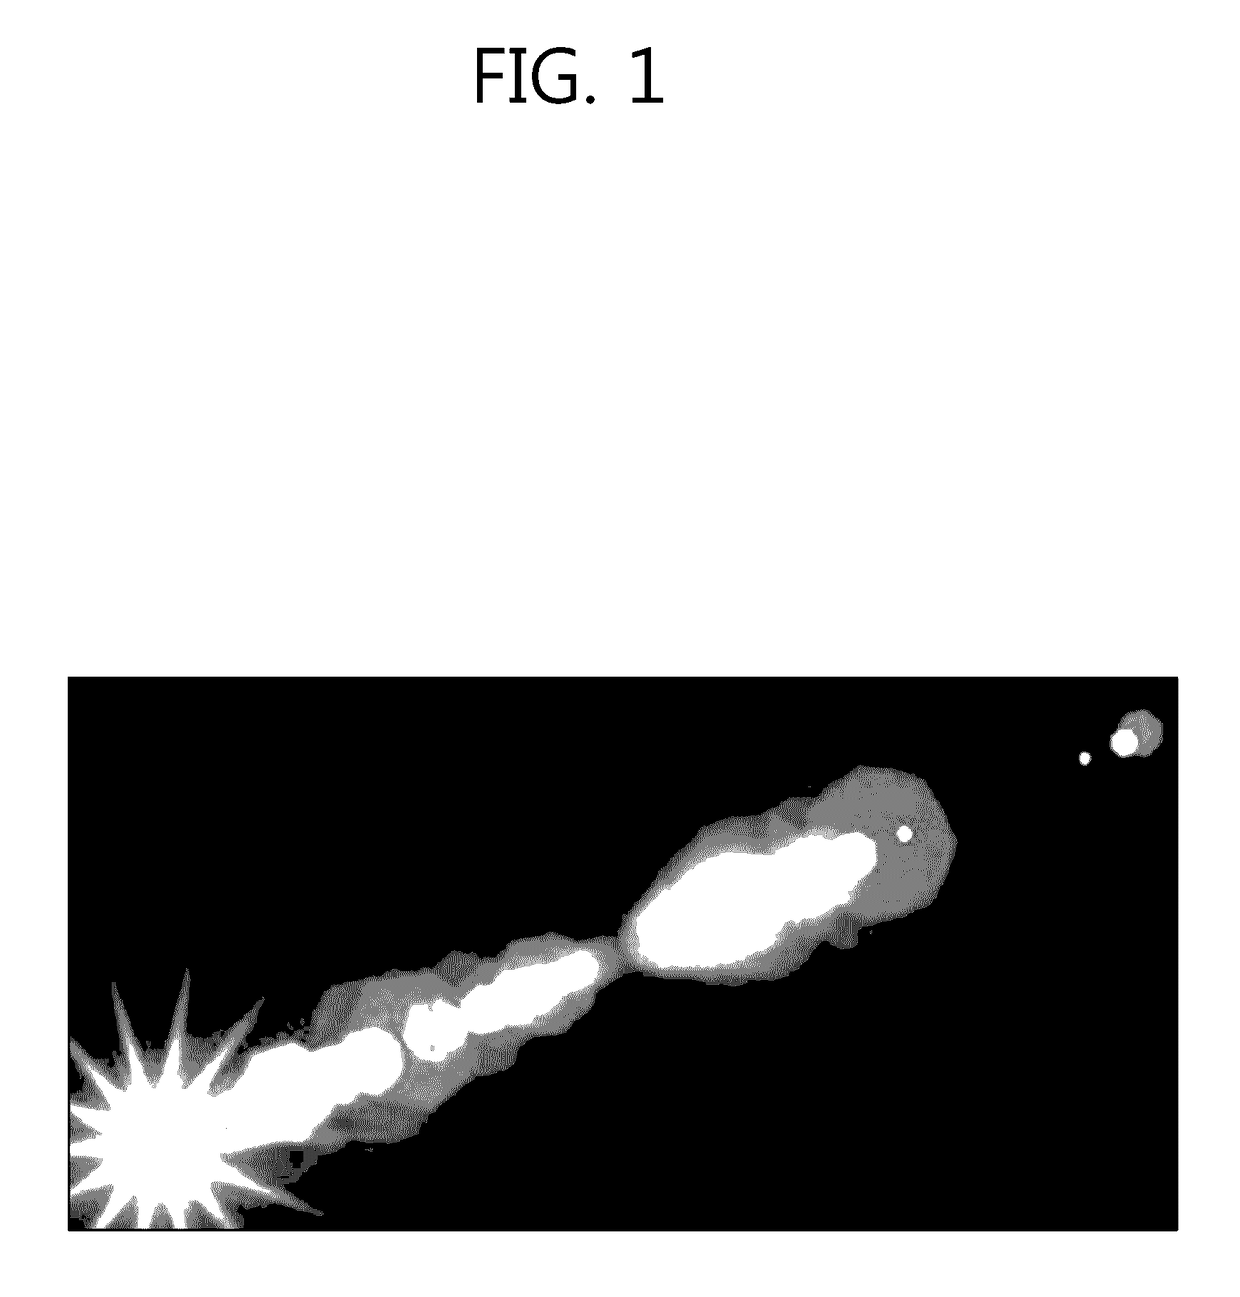 Methods and apparatuses of lens flare rendering using linear paraxial approximation, and methods and apparatuses of lens flare rendering based on blending